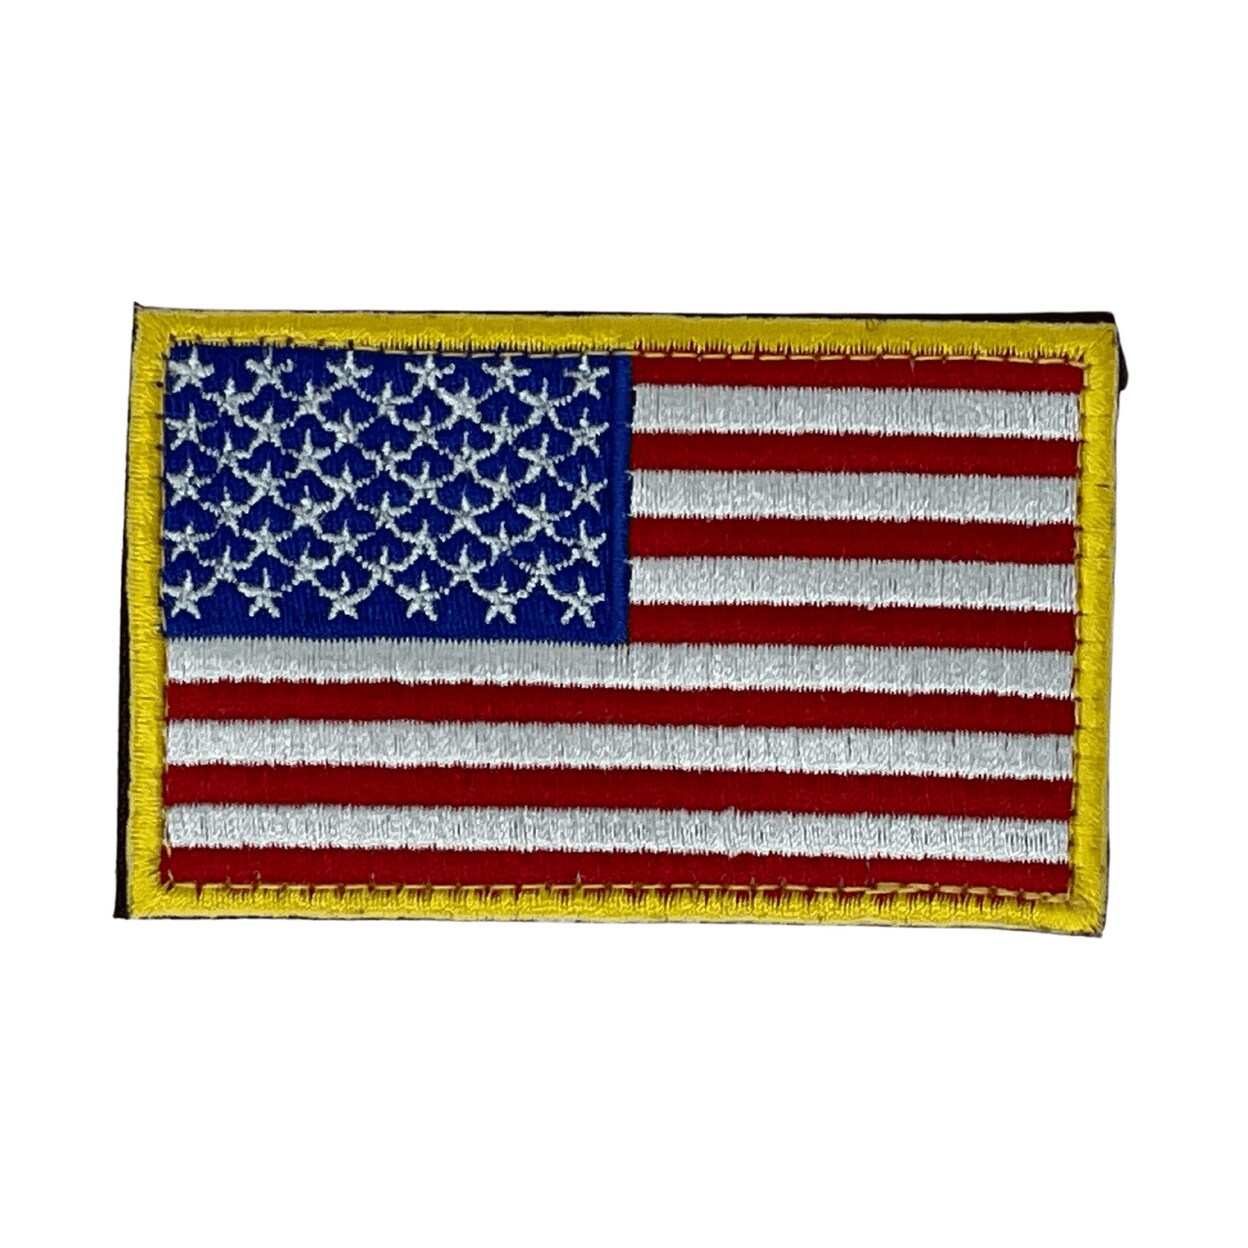 US Tactical American Flag Patch Black White 3 x 2 USA Iron On